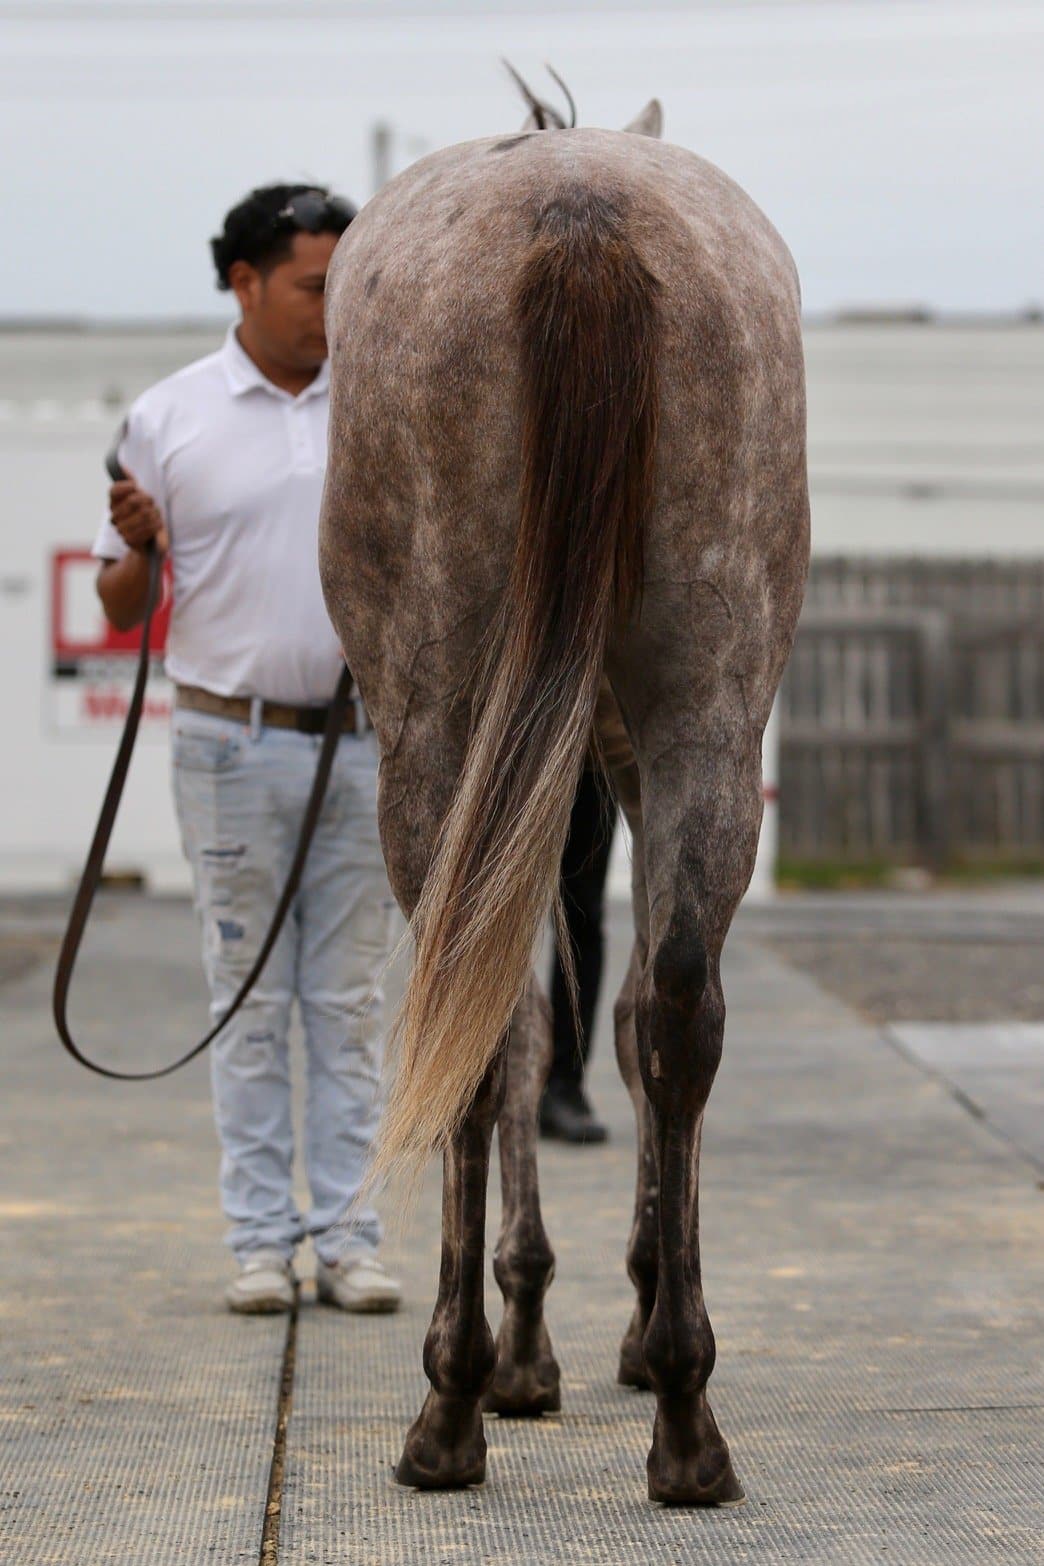 Iced Mocha- 2020 Gray or Roan Filly by Frosted out of Chocolate Smoothie, by Ghostzapper- rear.